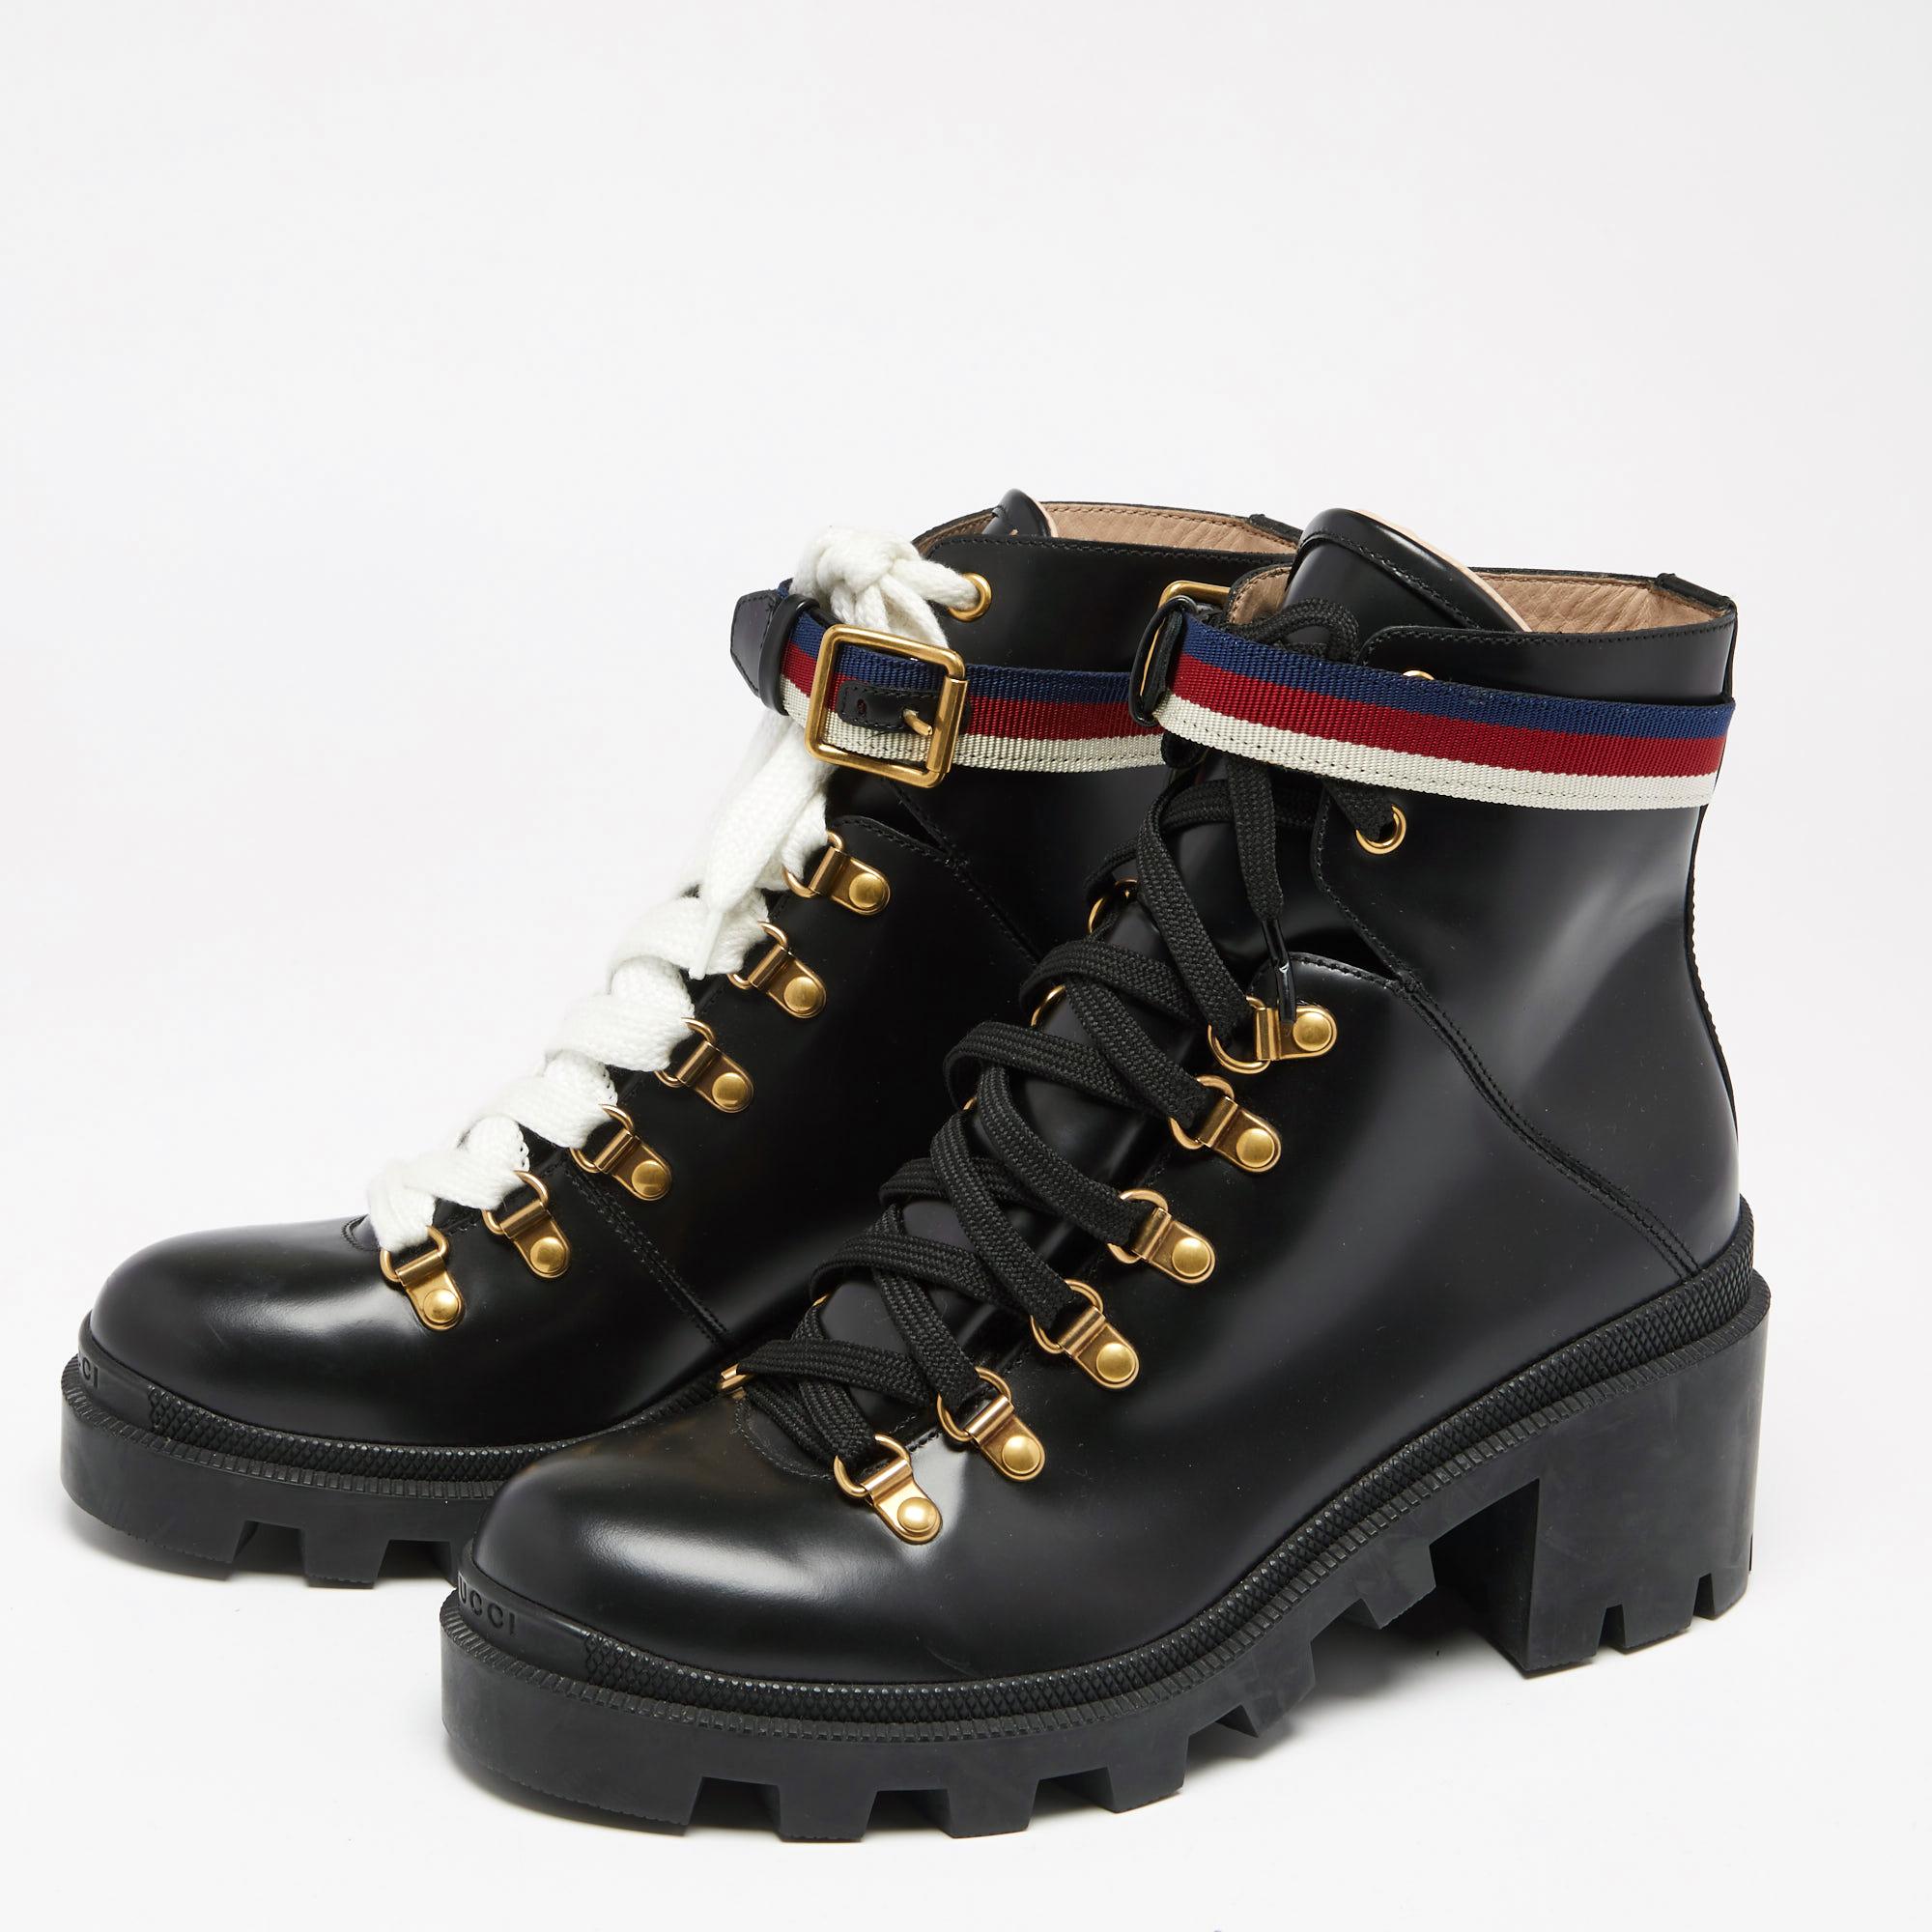 Stacked with signature details, this Gucci pair is rendered from leather and can be easily paired with most casual outfits. The opening of these shoes is designed with Web stripe and they rest on durable rubber soles. With a classy black shade, the